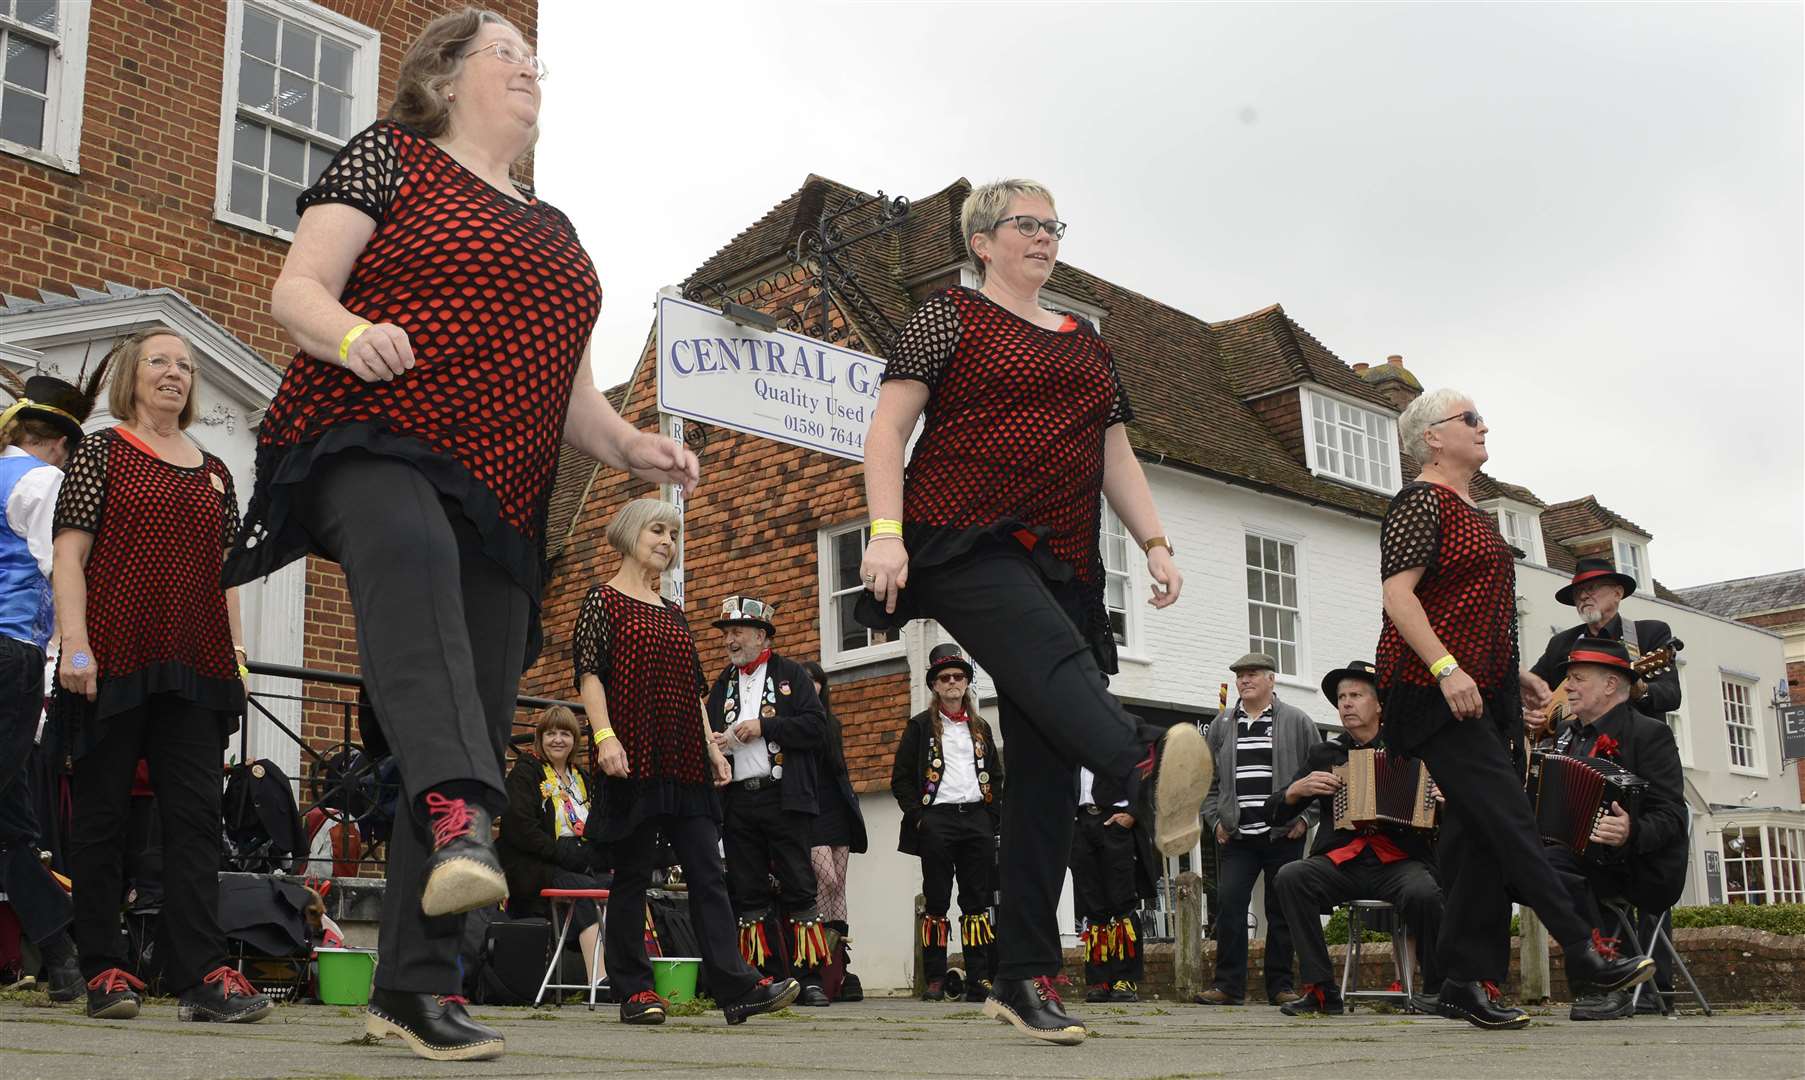 Morris sides will be part of the Tenterden Folk Festival entertainment Picture: Paul Amos